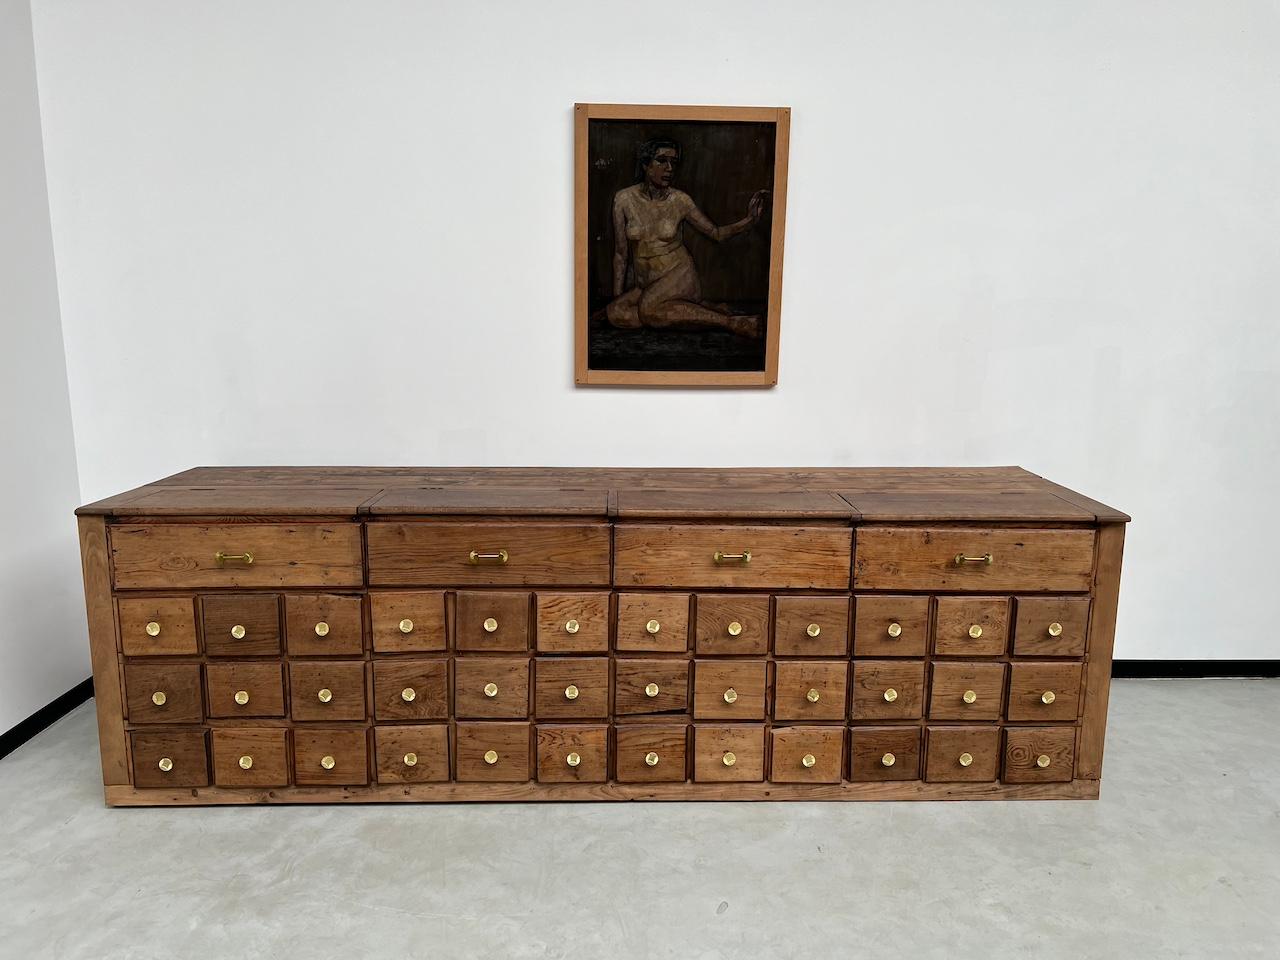 Superb piece of furniture from the 1920s in solid oak that we have completely restored. It consists of 36 drawers, 9 of which are full depth and the other 27 are 50 cm deep. This piece of furniture is magnificent and will bring a very special